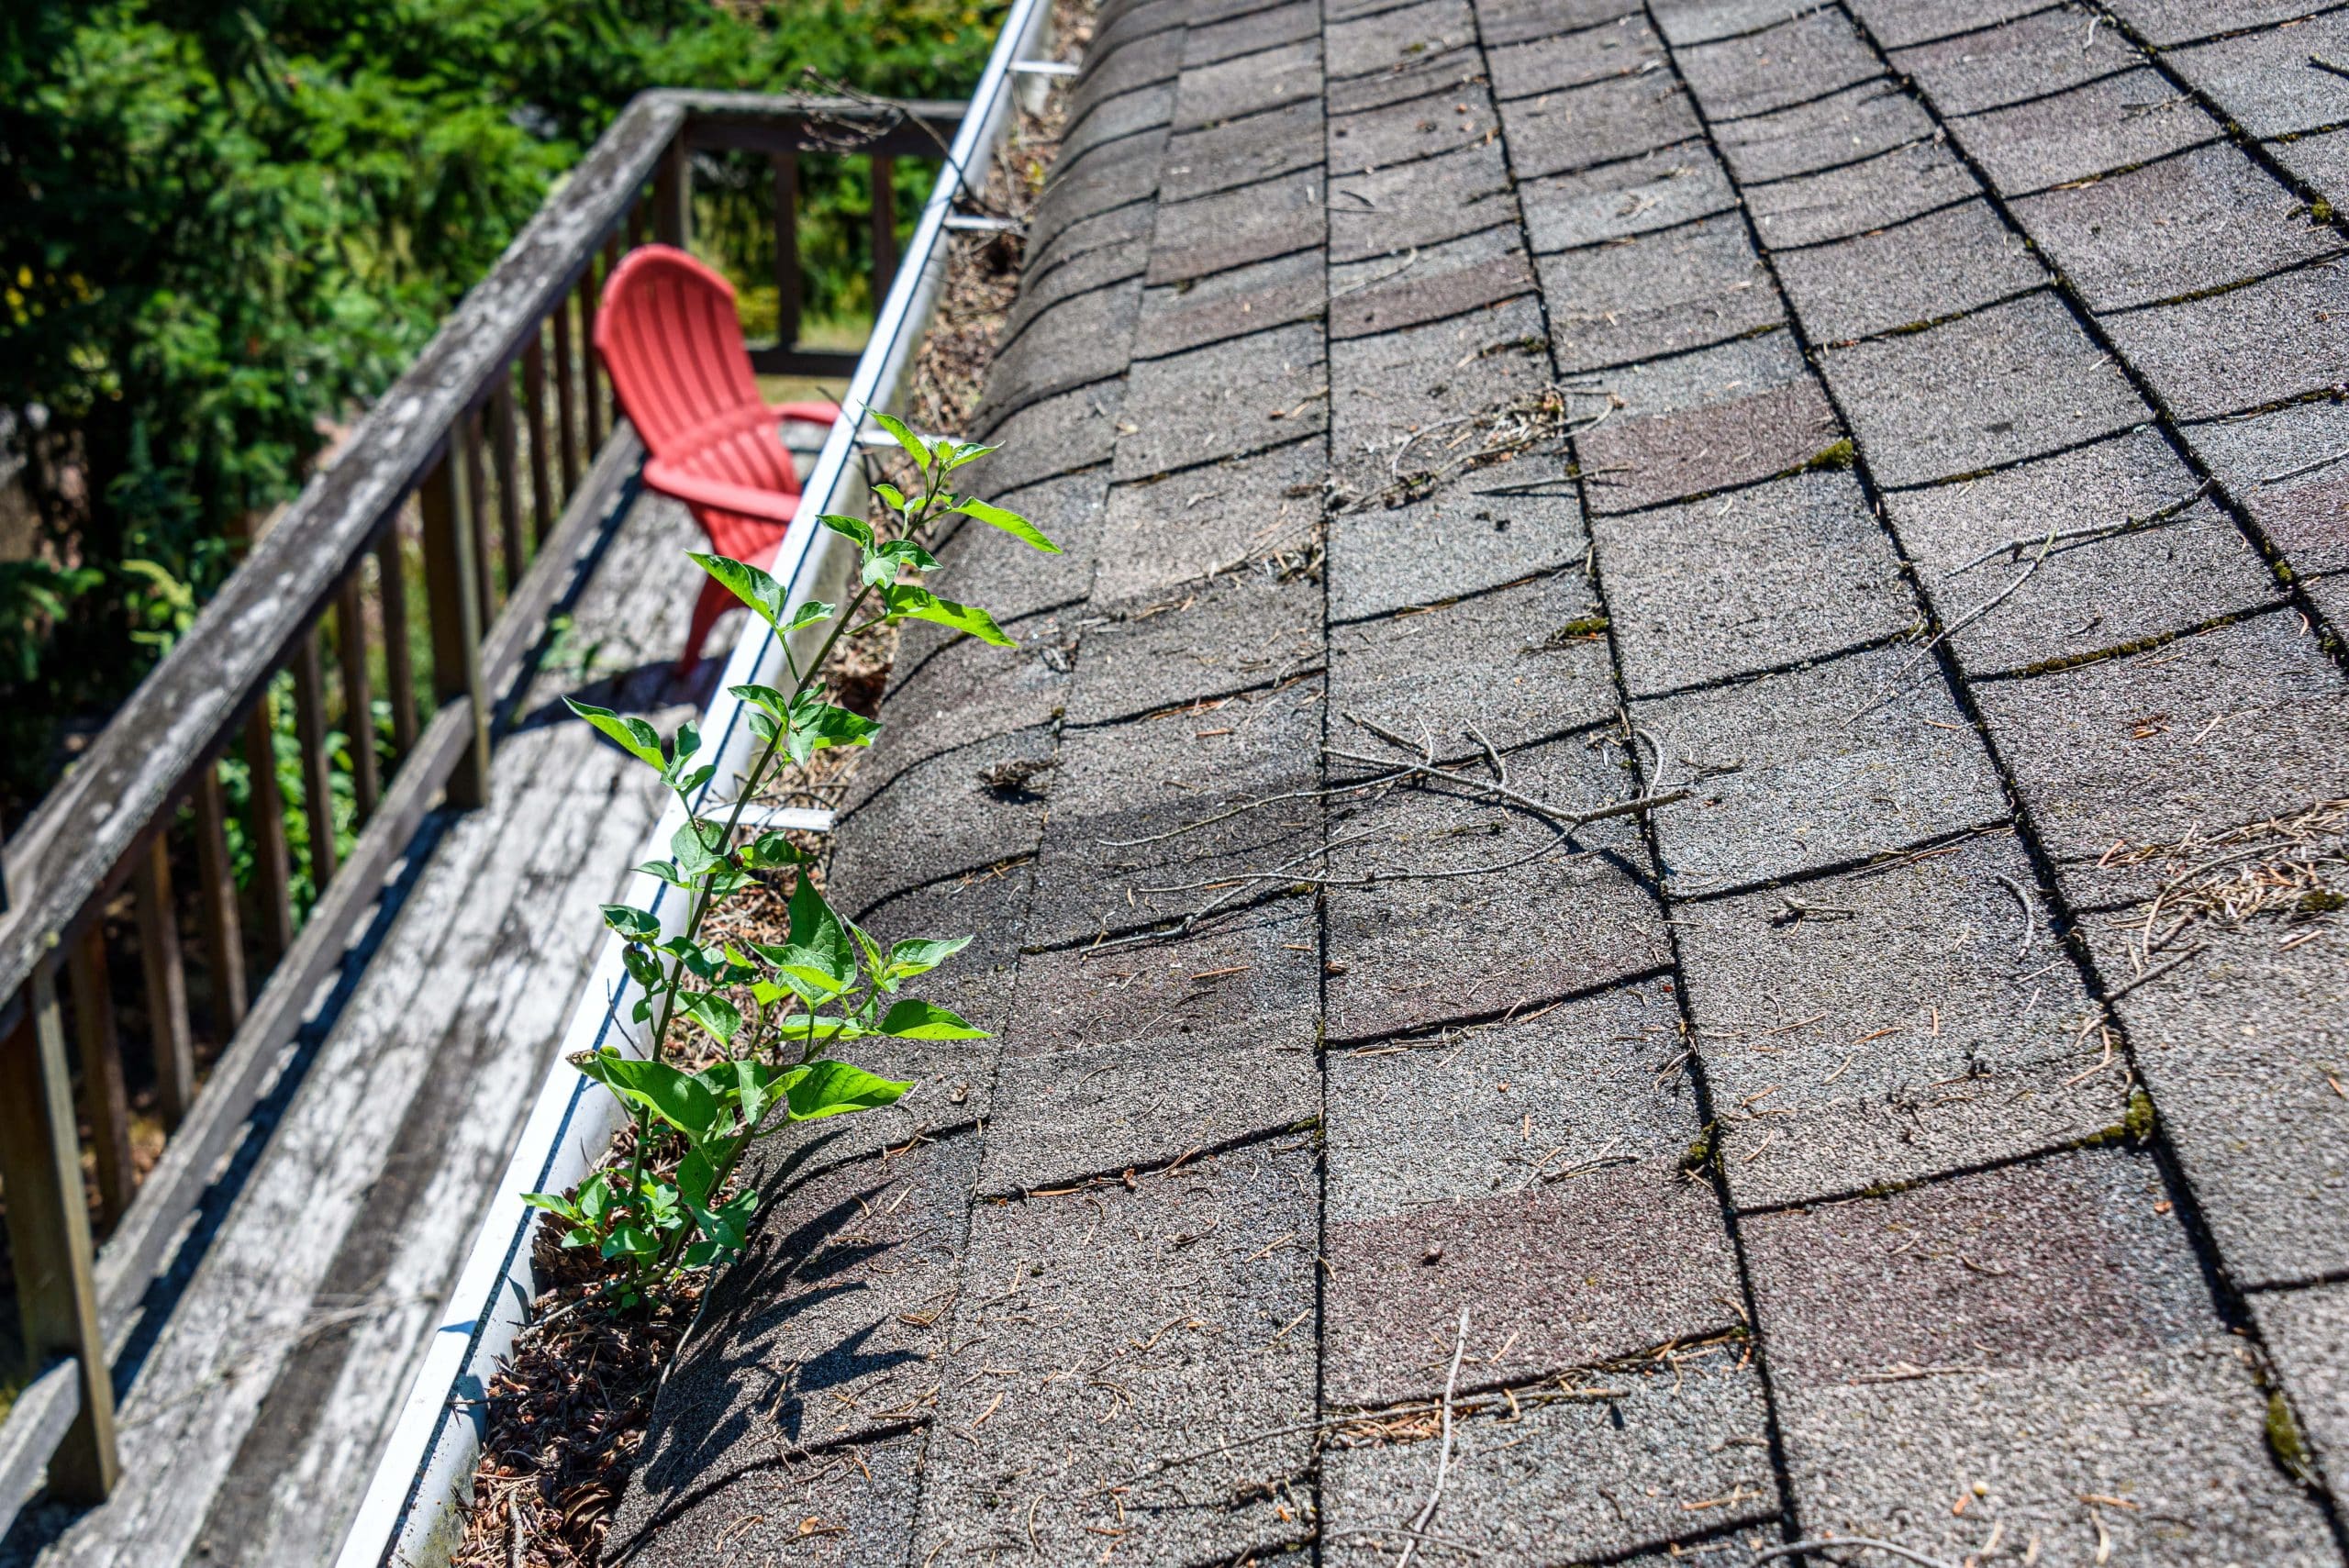 Clogged gutters in need of a gutter cleaning service.